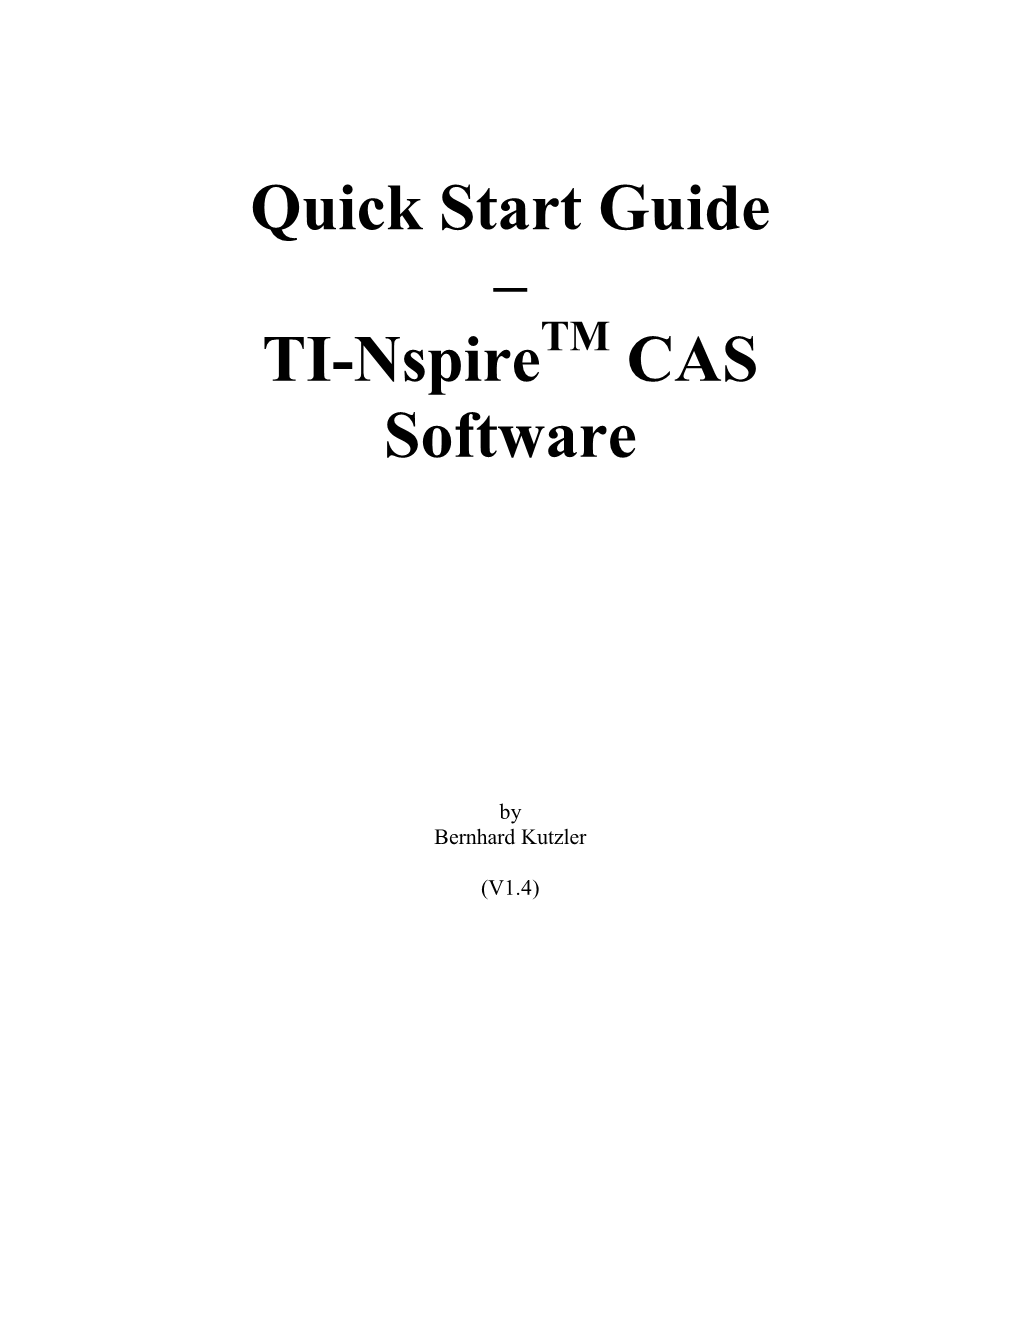 TI-Nspire CAS Software: the Standard Edition and the Teacher Edition